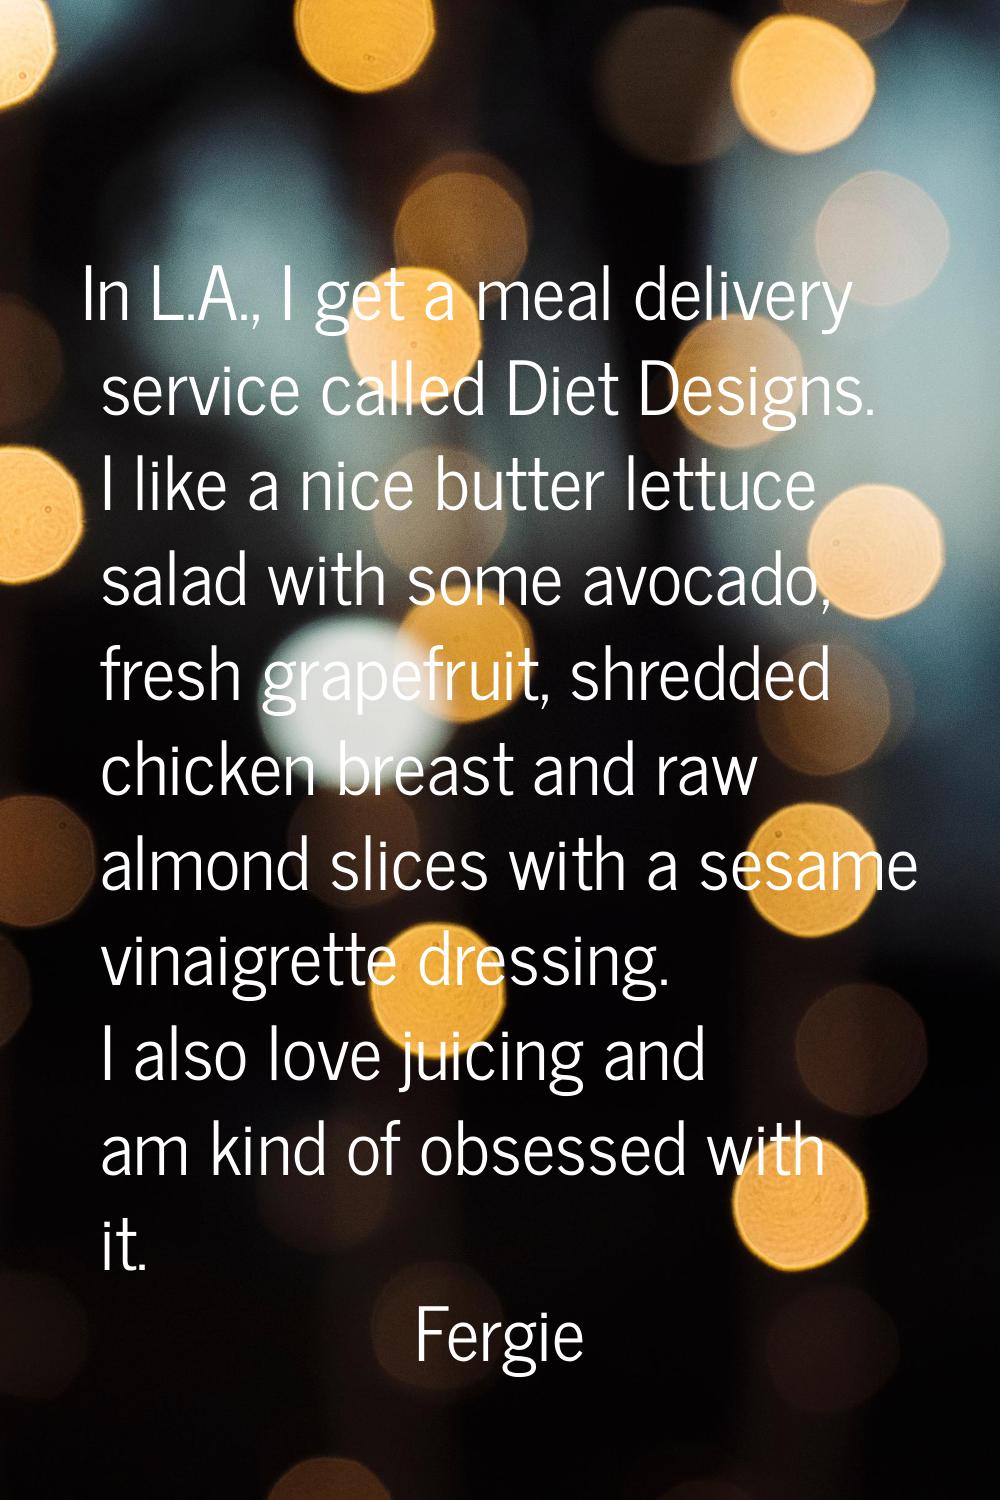 In L.A., I get a meal delivery service called Diet Designs. I like a nice butter lettuce salad with